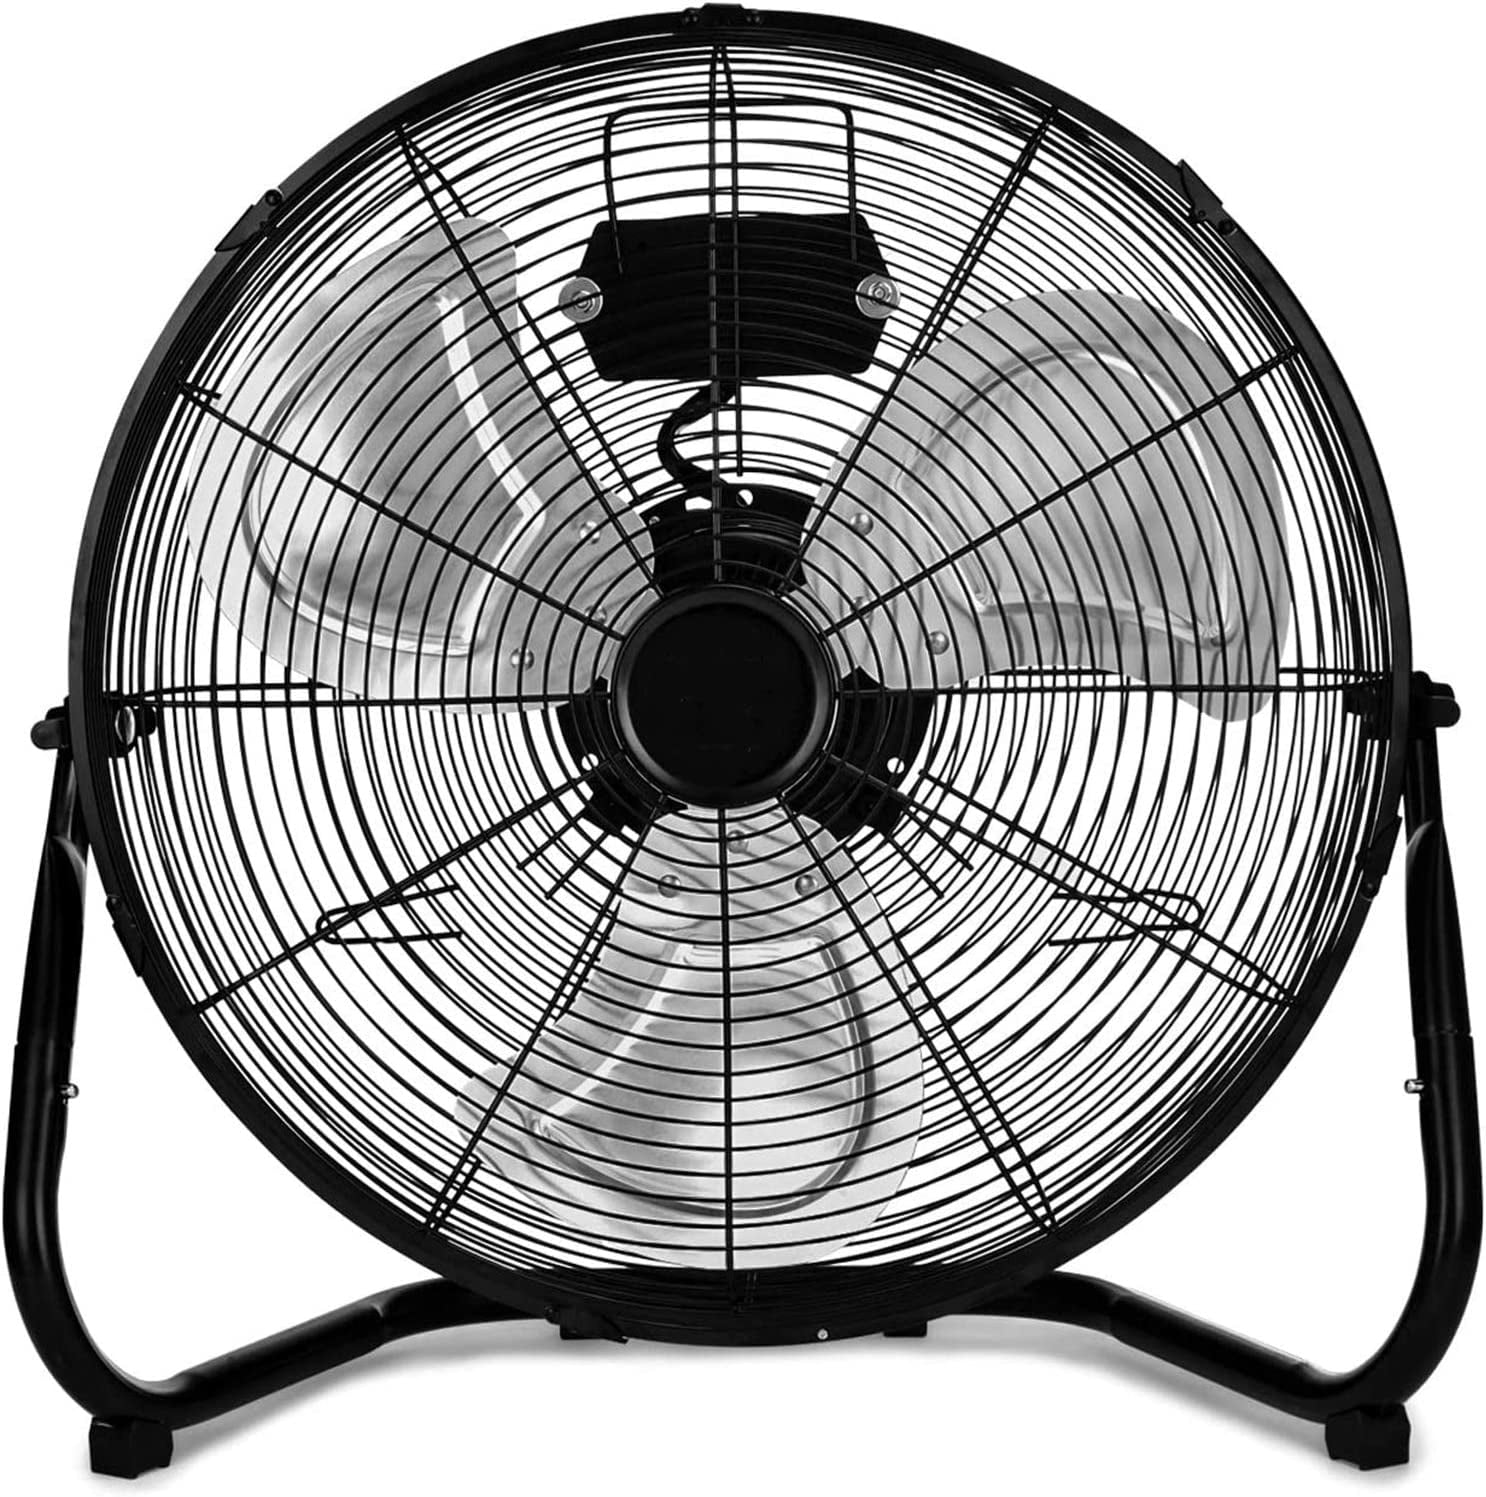 HealSmart 3-Speed High Velocity Heavy Duty Metal Industrial Floor Fans  Oscillating Quiet for Home, Commercial, Residential, and Greenhouse Use,  Outdoor and Indoor, Black, 20